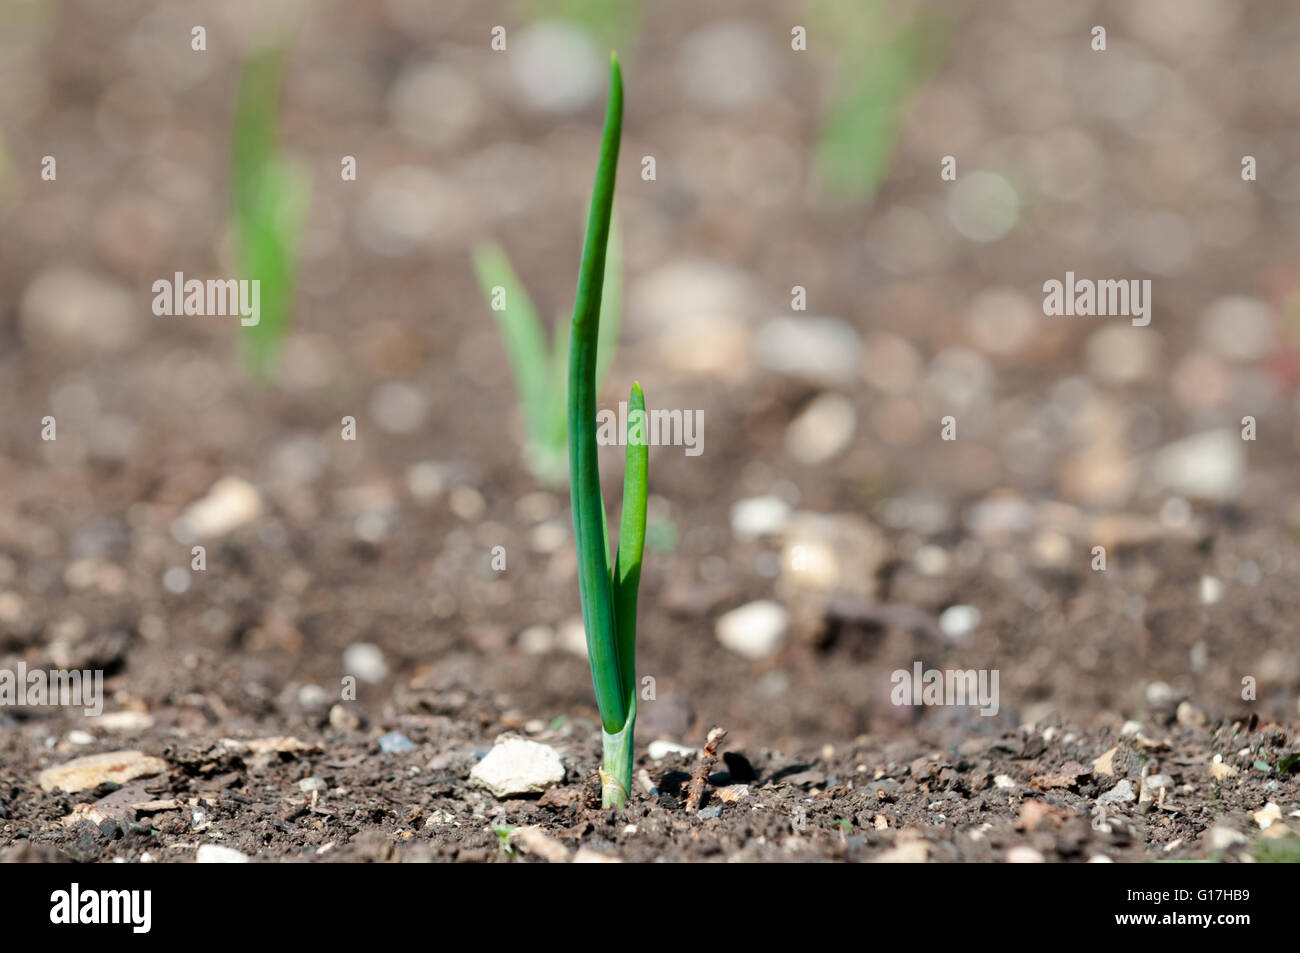 Small green plant shoot growing from dry soil, concept for new beginnings Stock Photo